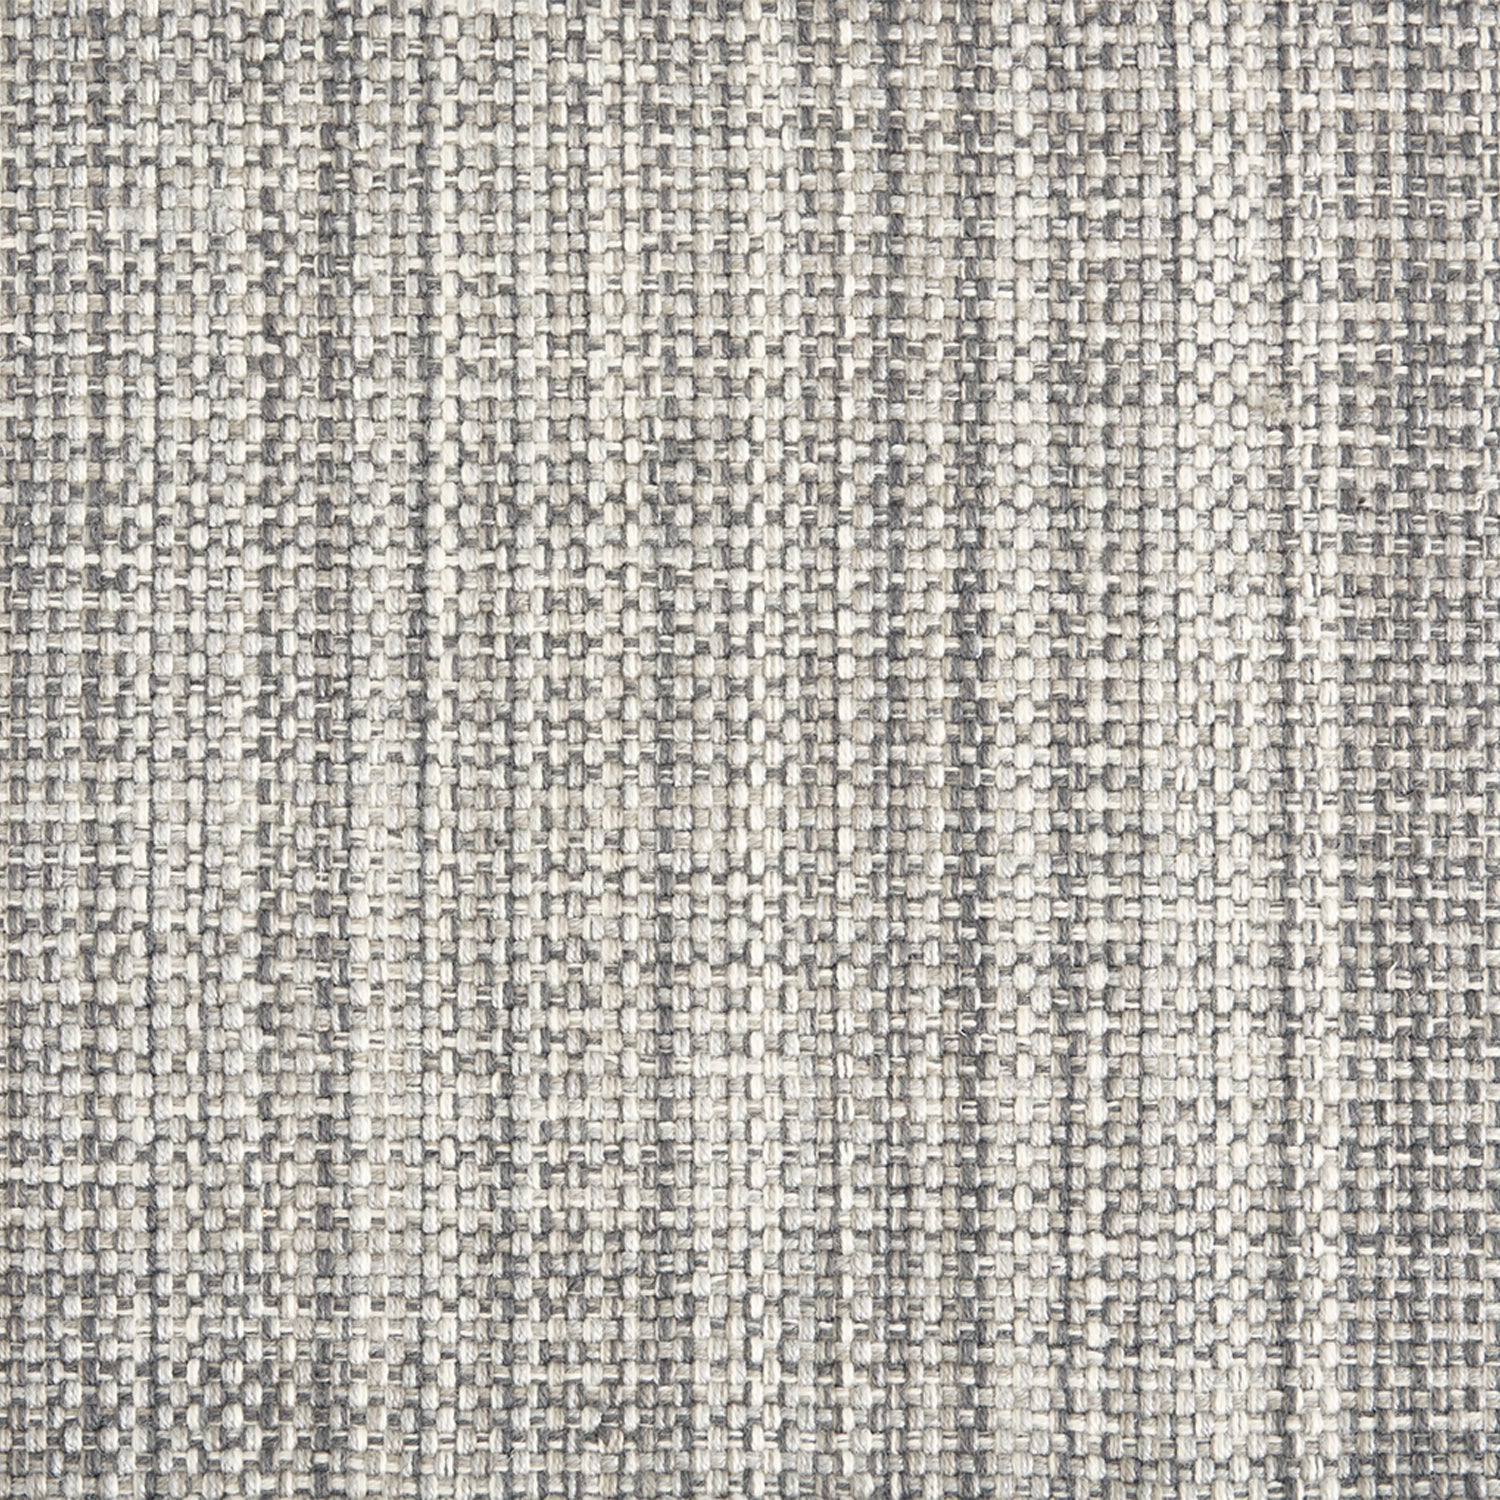 Outdoor broadloom carpet swatch in a chunky flatweave in mottled white, tan and gray.